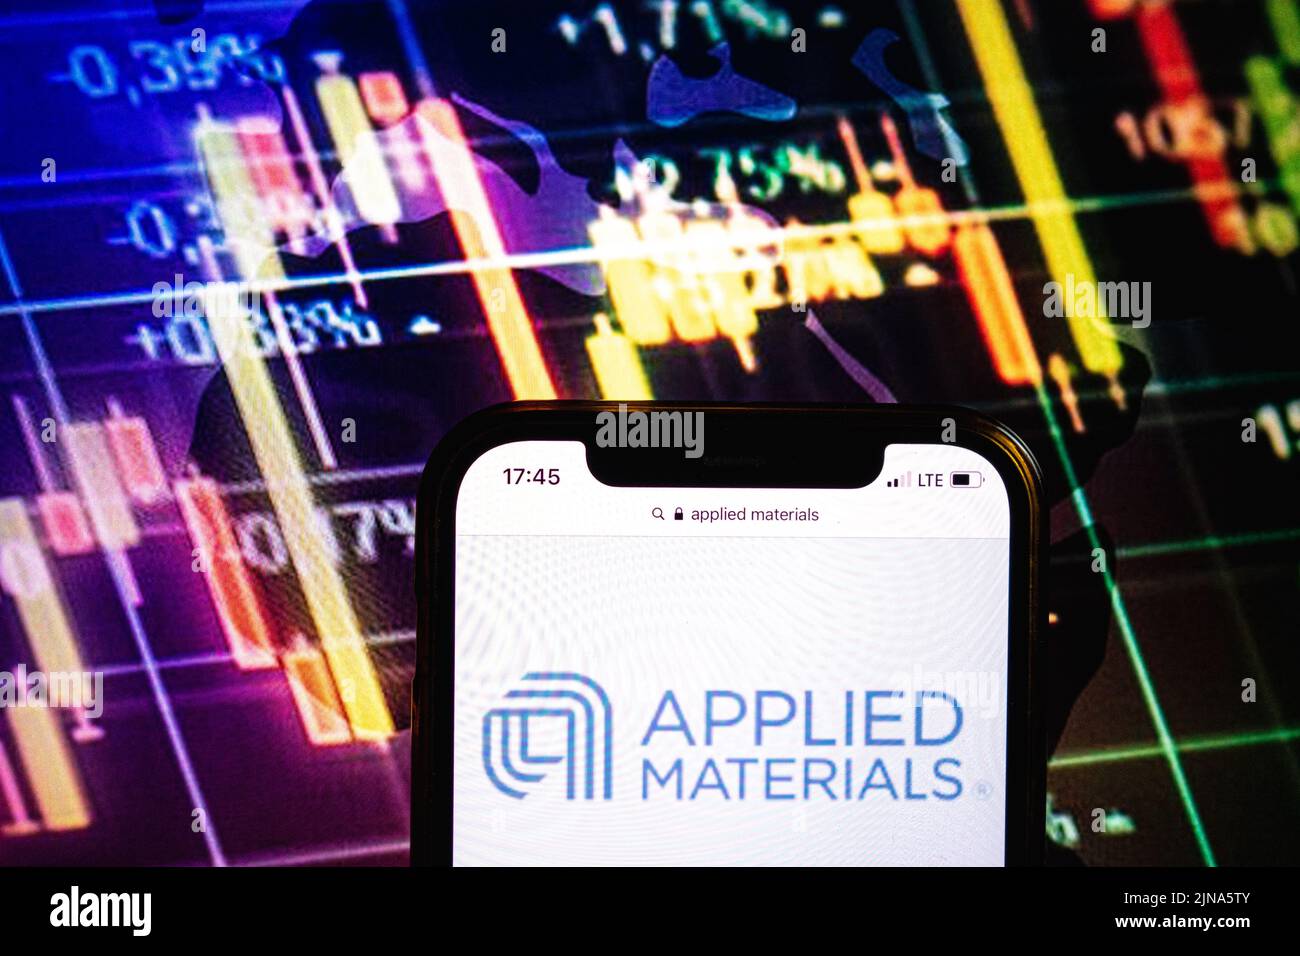 KONSKIE, POLAND - August 09, 2022: Smartphone displaying logo of Applied Materials company on stock exchange diagram background Stock Photo